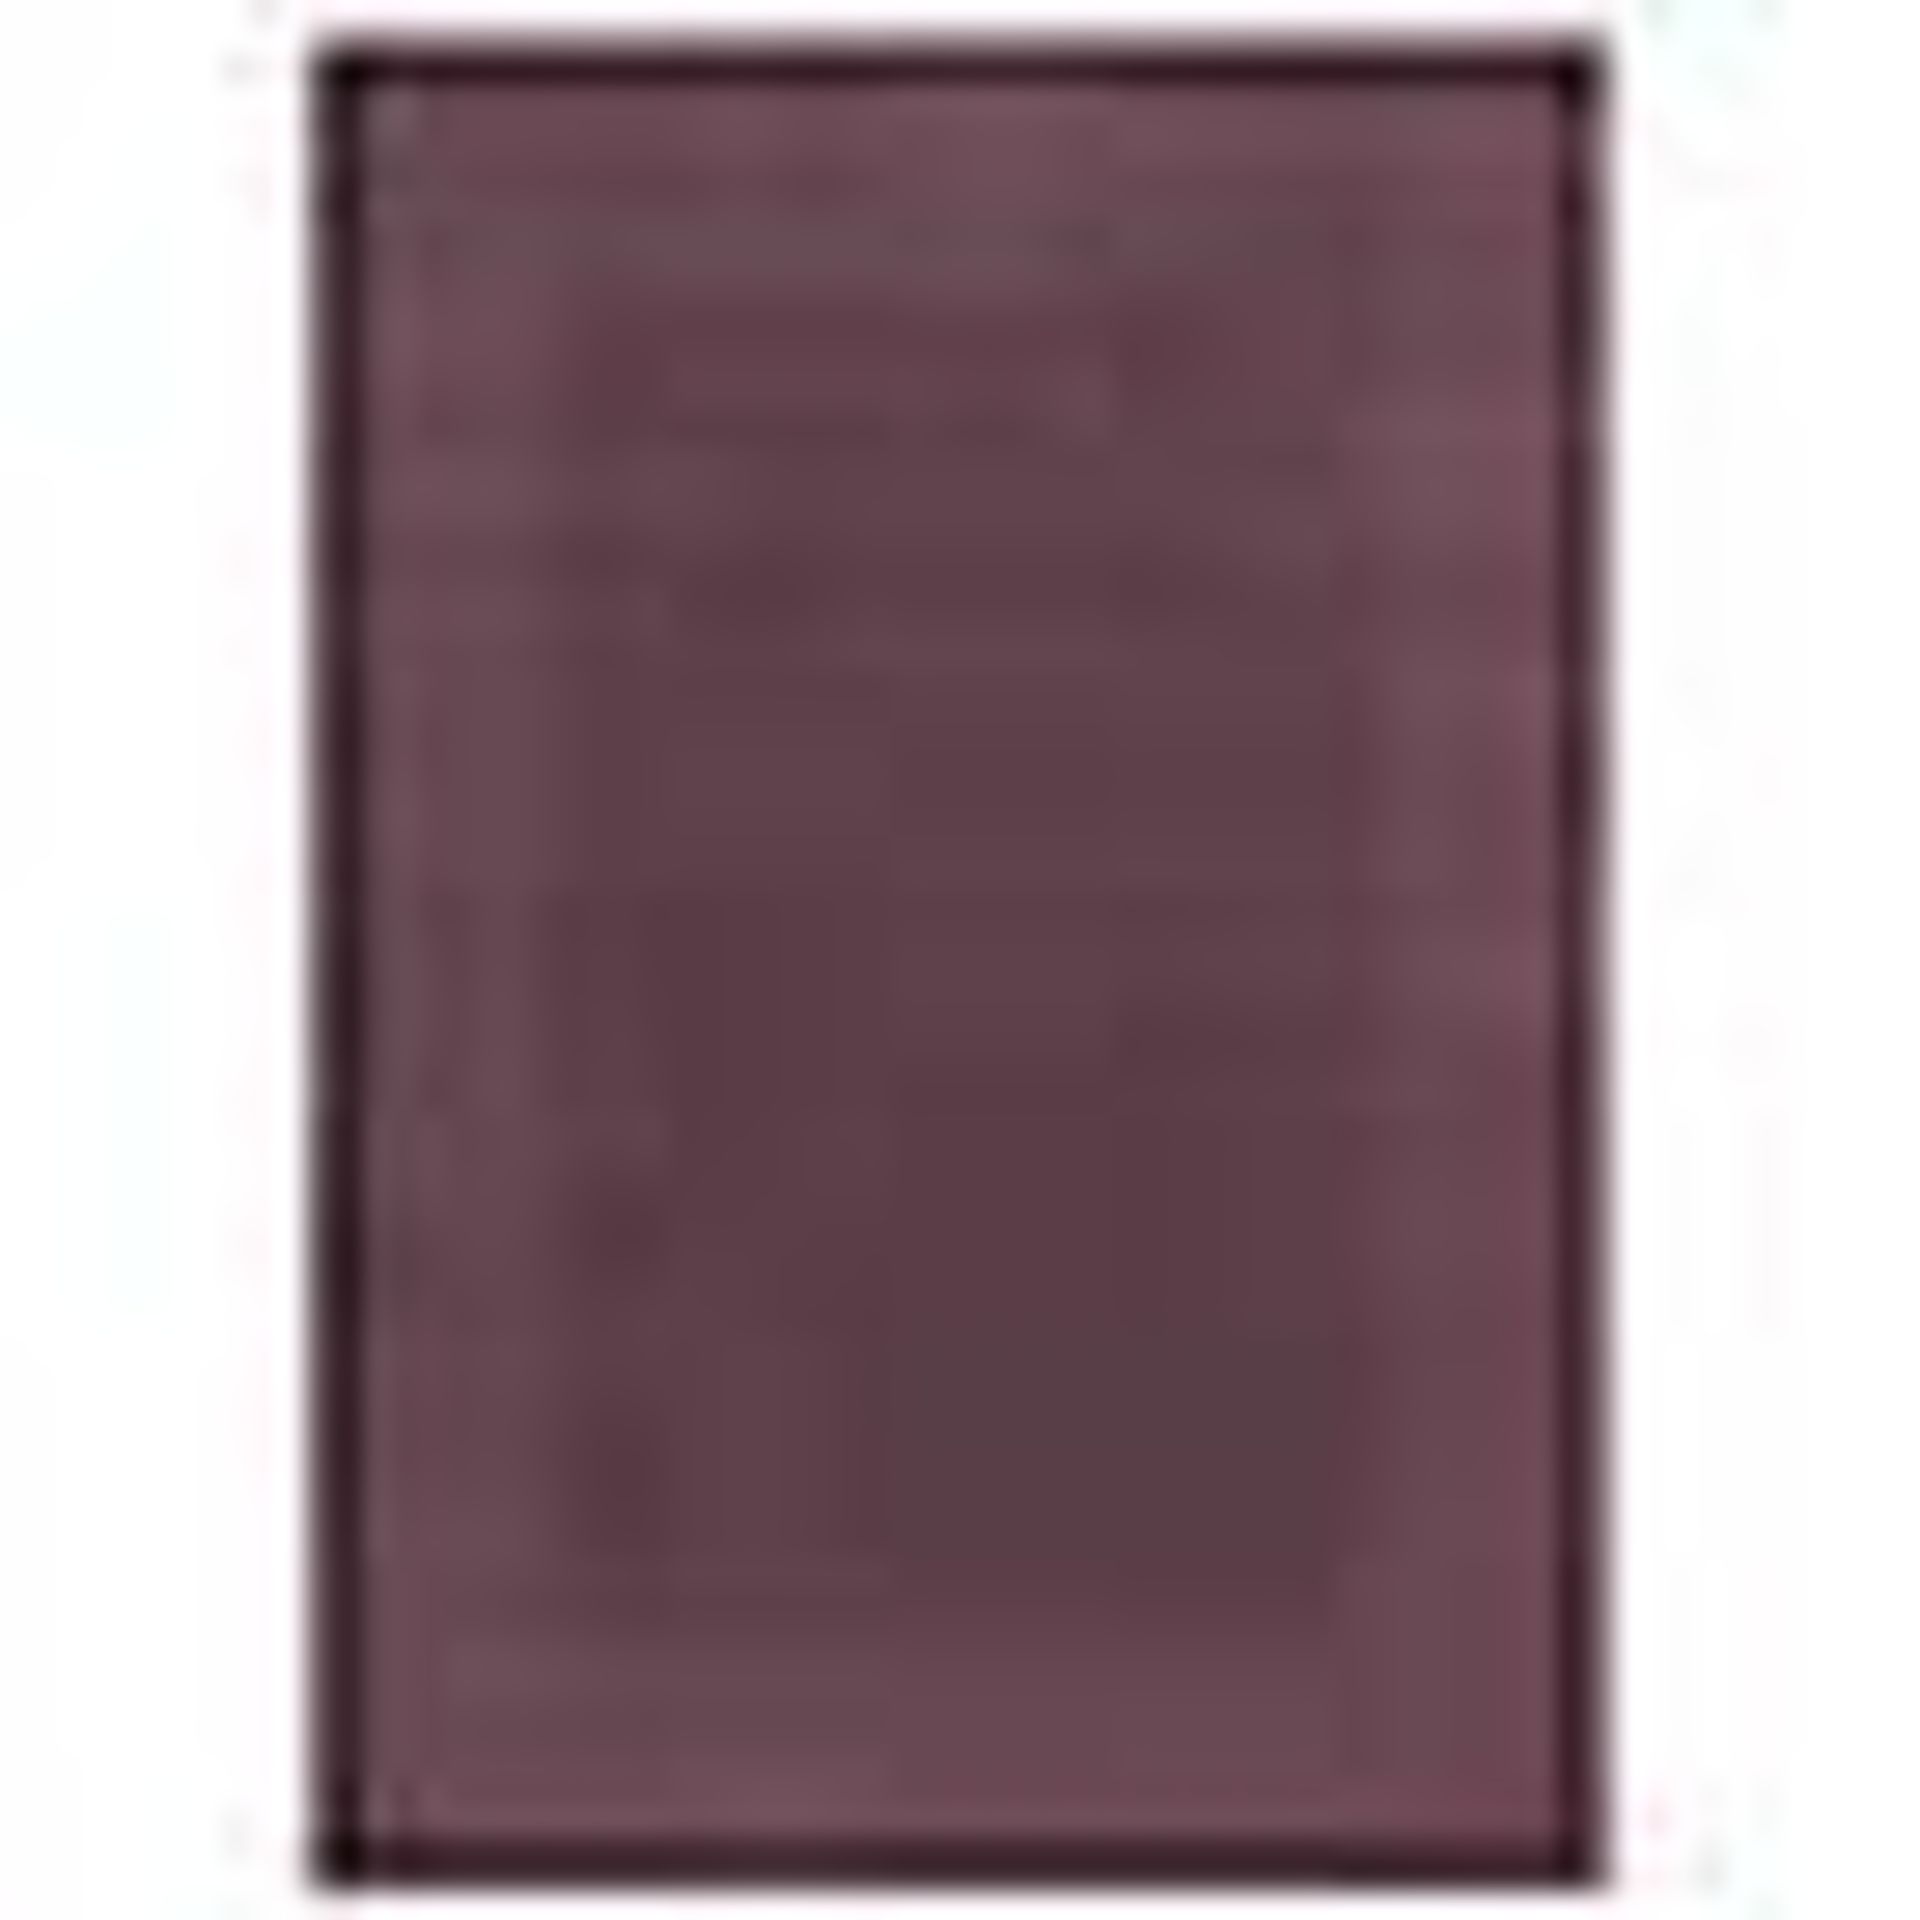 Tuscany D040 Rug Boston Wool Border Plum Rectangle 160X230cm RRP 129 About the Product(s) Tuscany